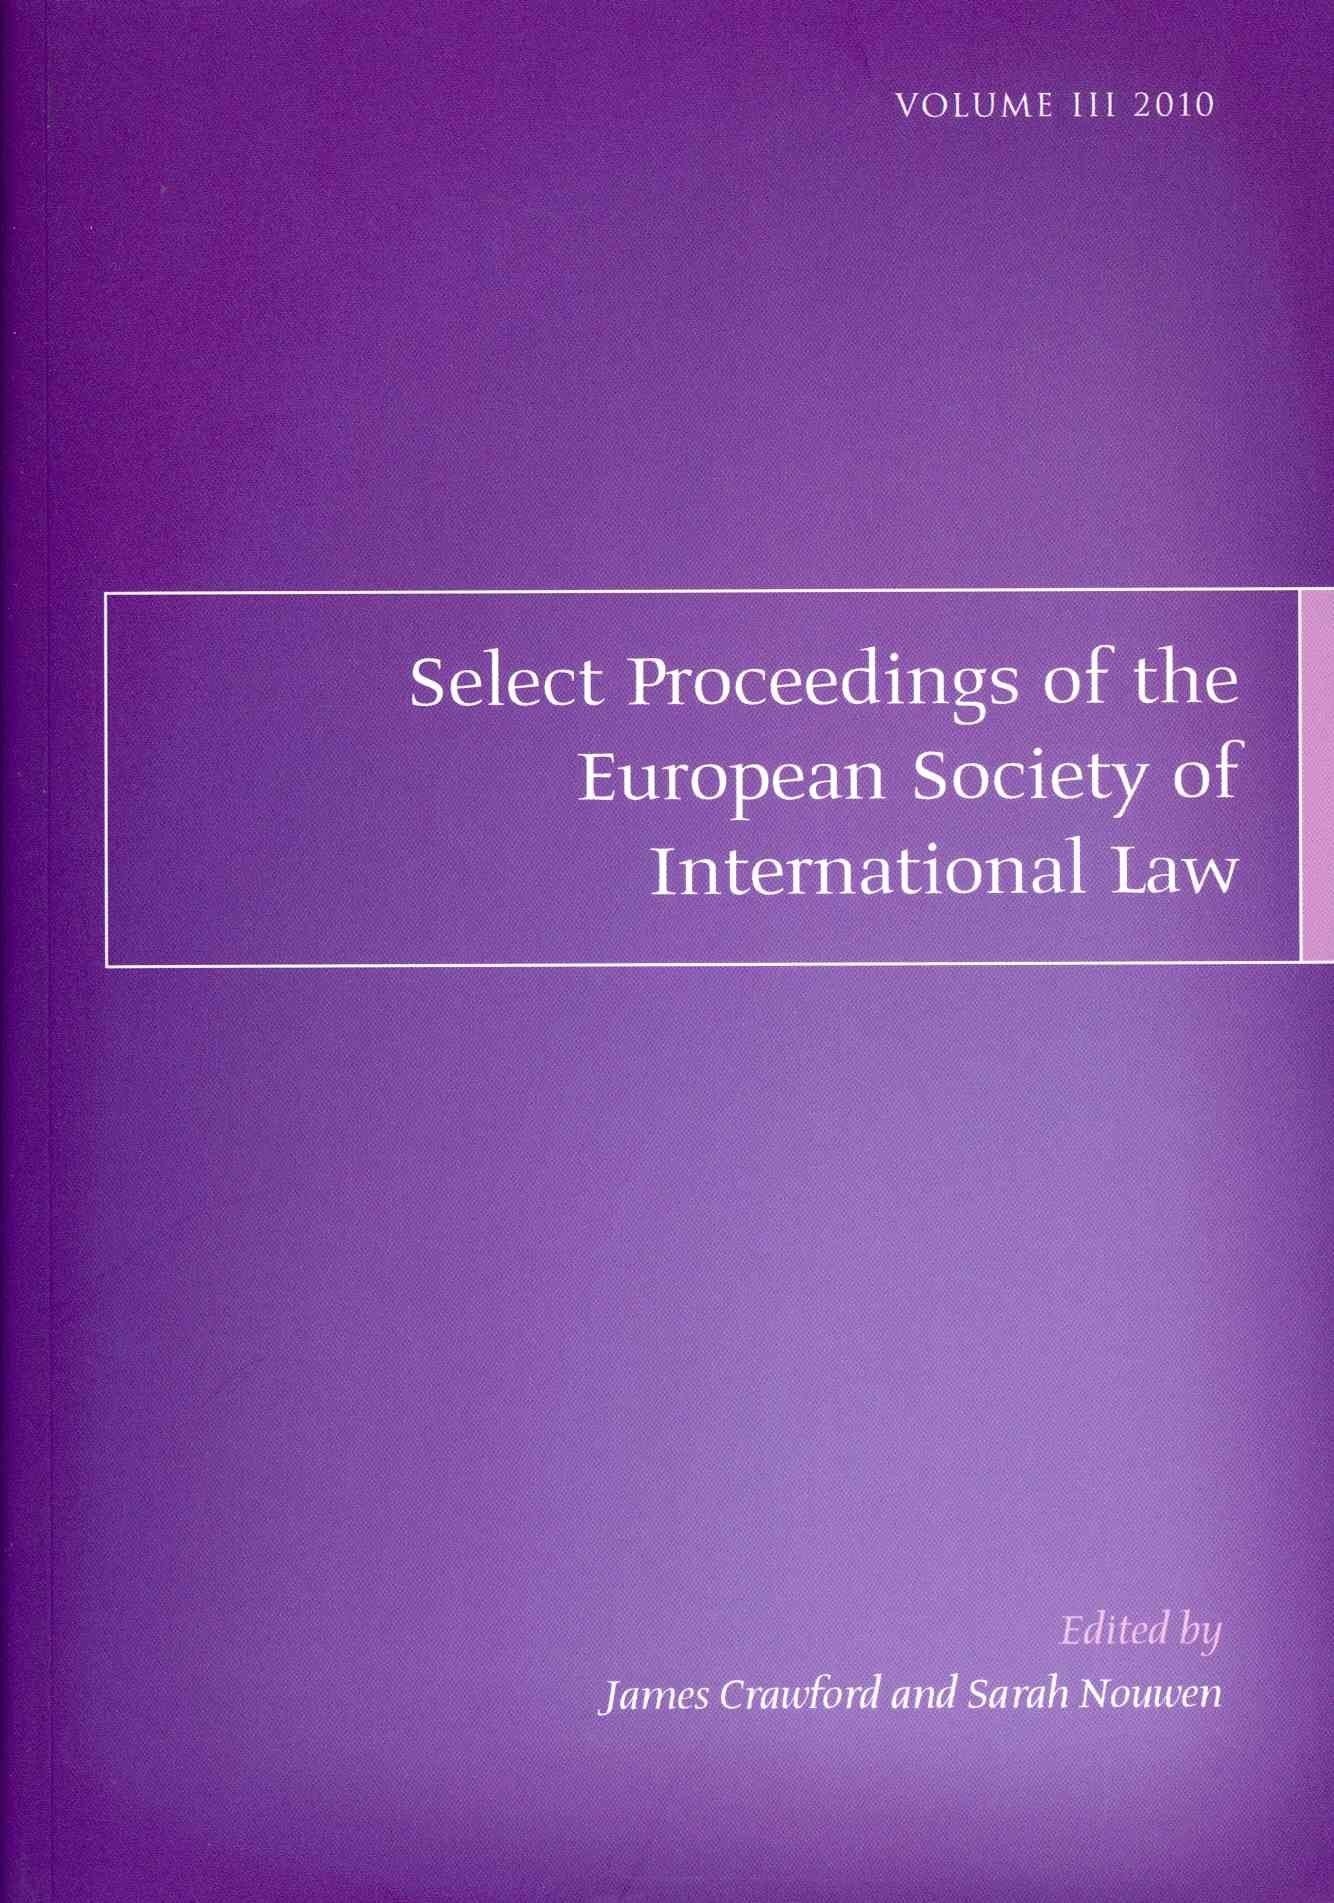 Select Proceedings of the European Society of International Law, Volume 3, 2010